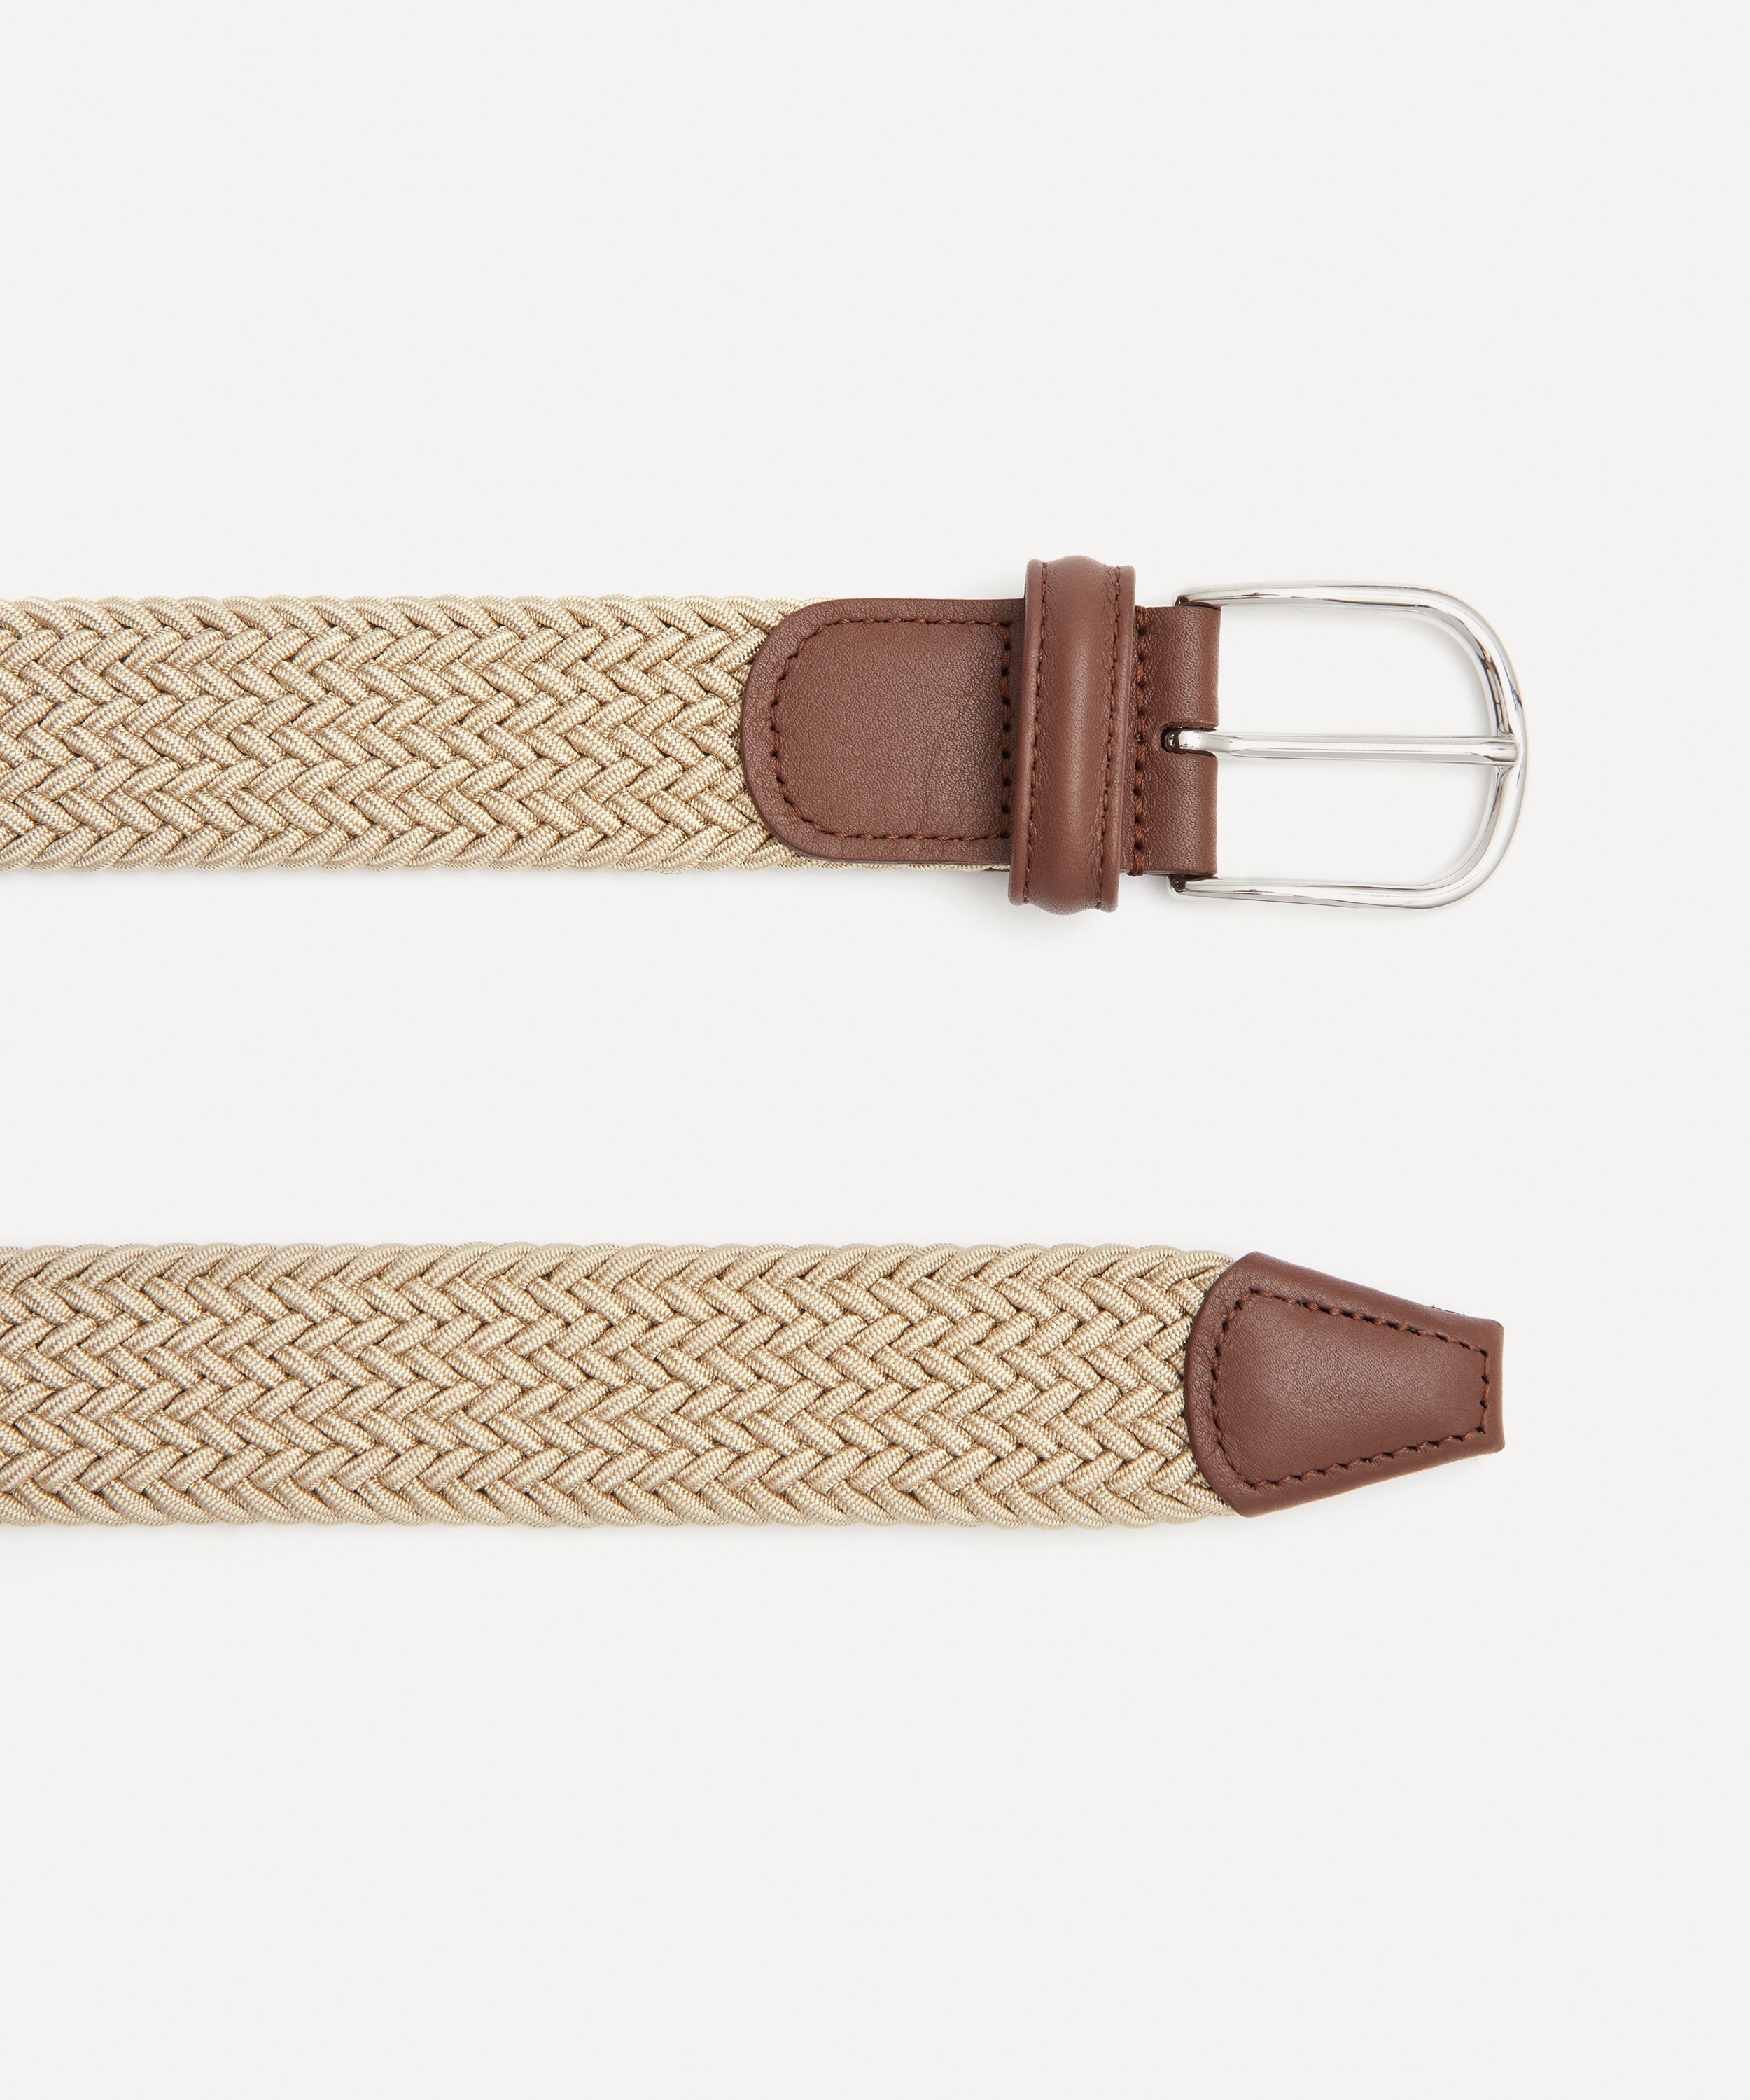 Anderson's Classic Brown Elastic Woven Belt - Braided belts 